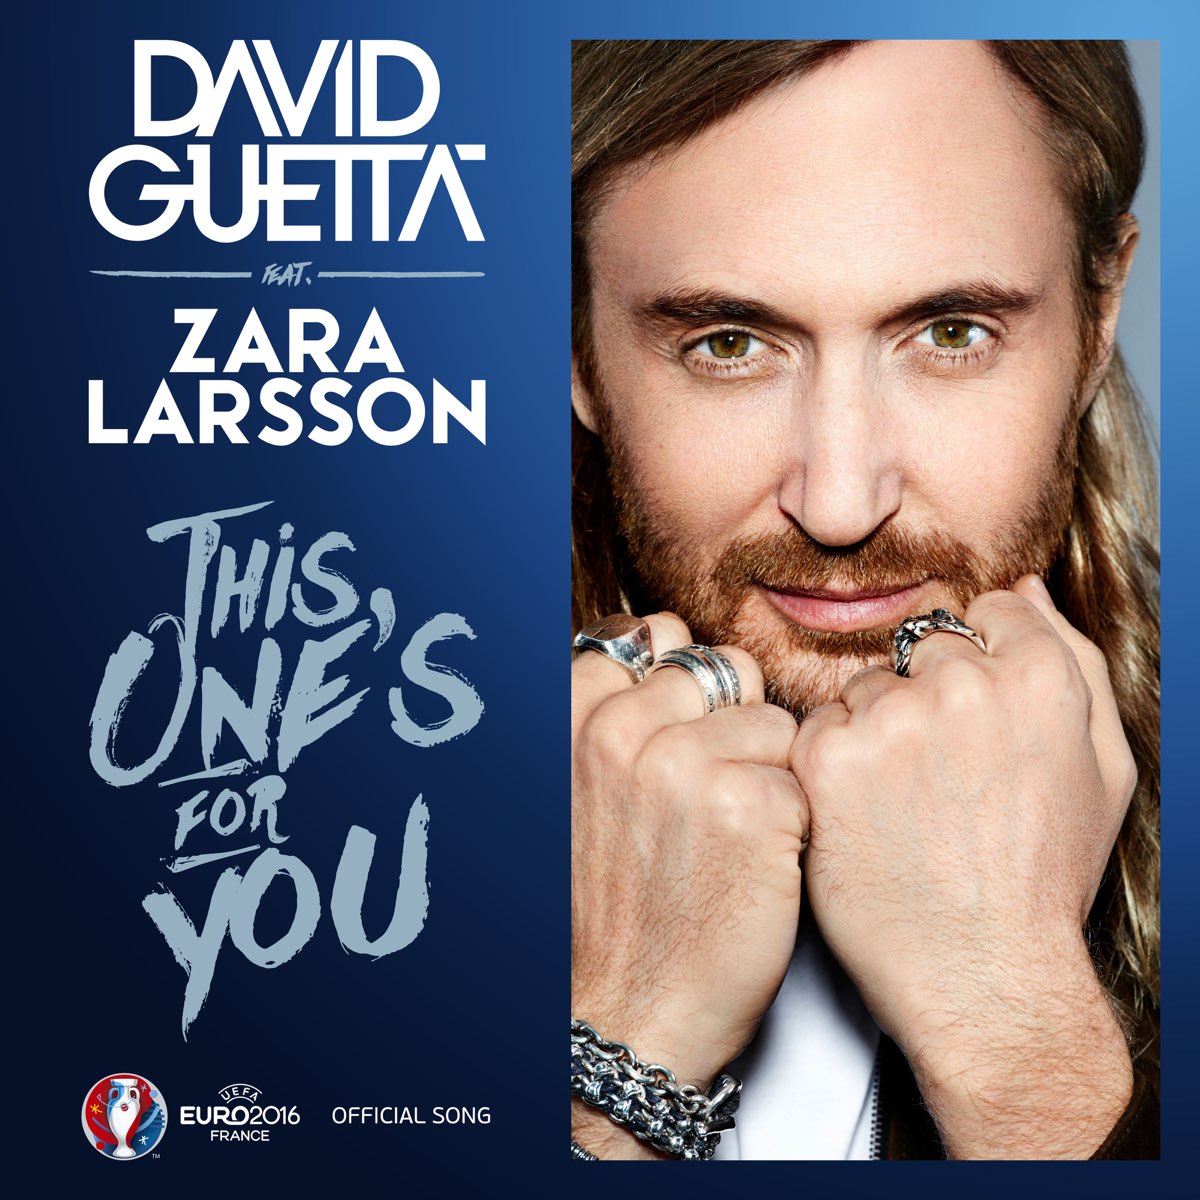 Yes this one. David Guetta 2023. David Guetta feat. Zara Larsson - this one's for you (Official Song UEFA Euro 2016). David Guetta Zara Larsson. David Guetta 2016.